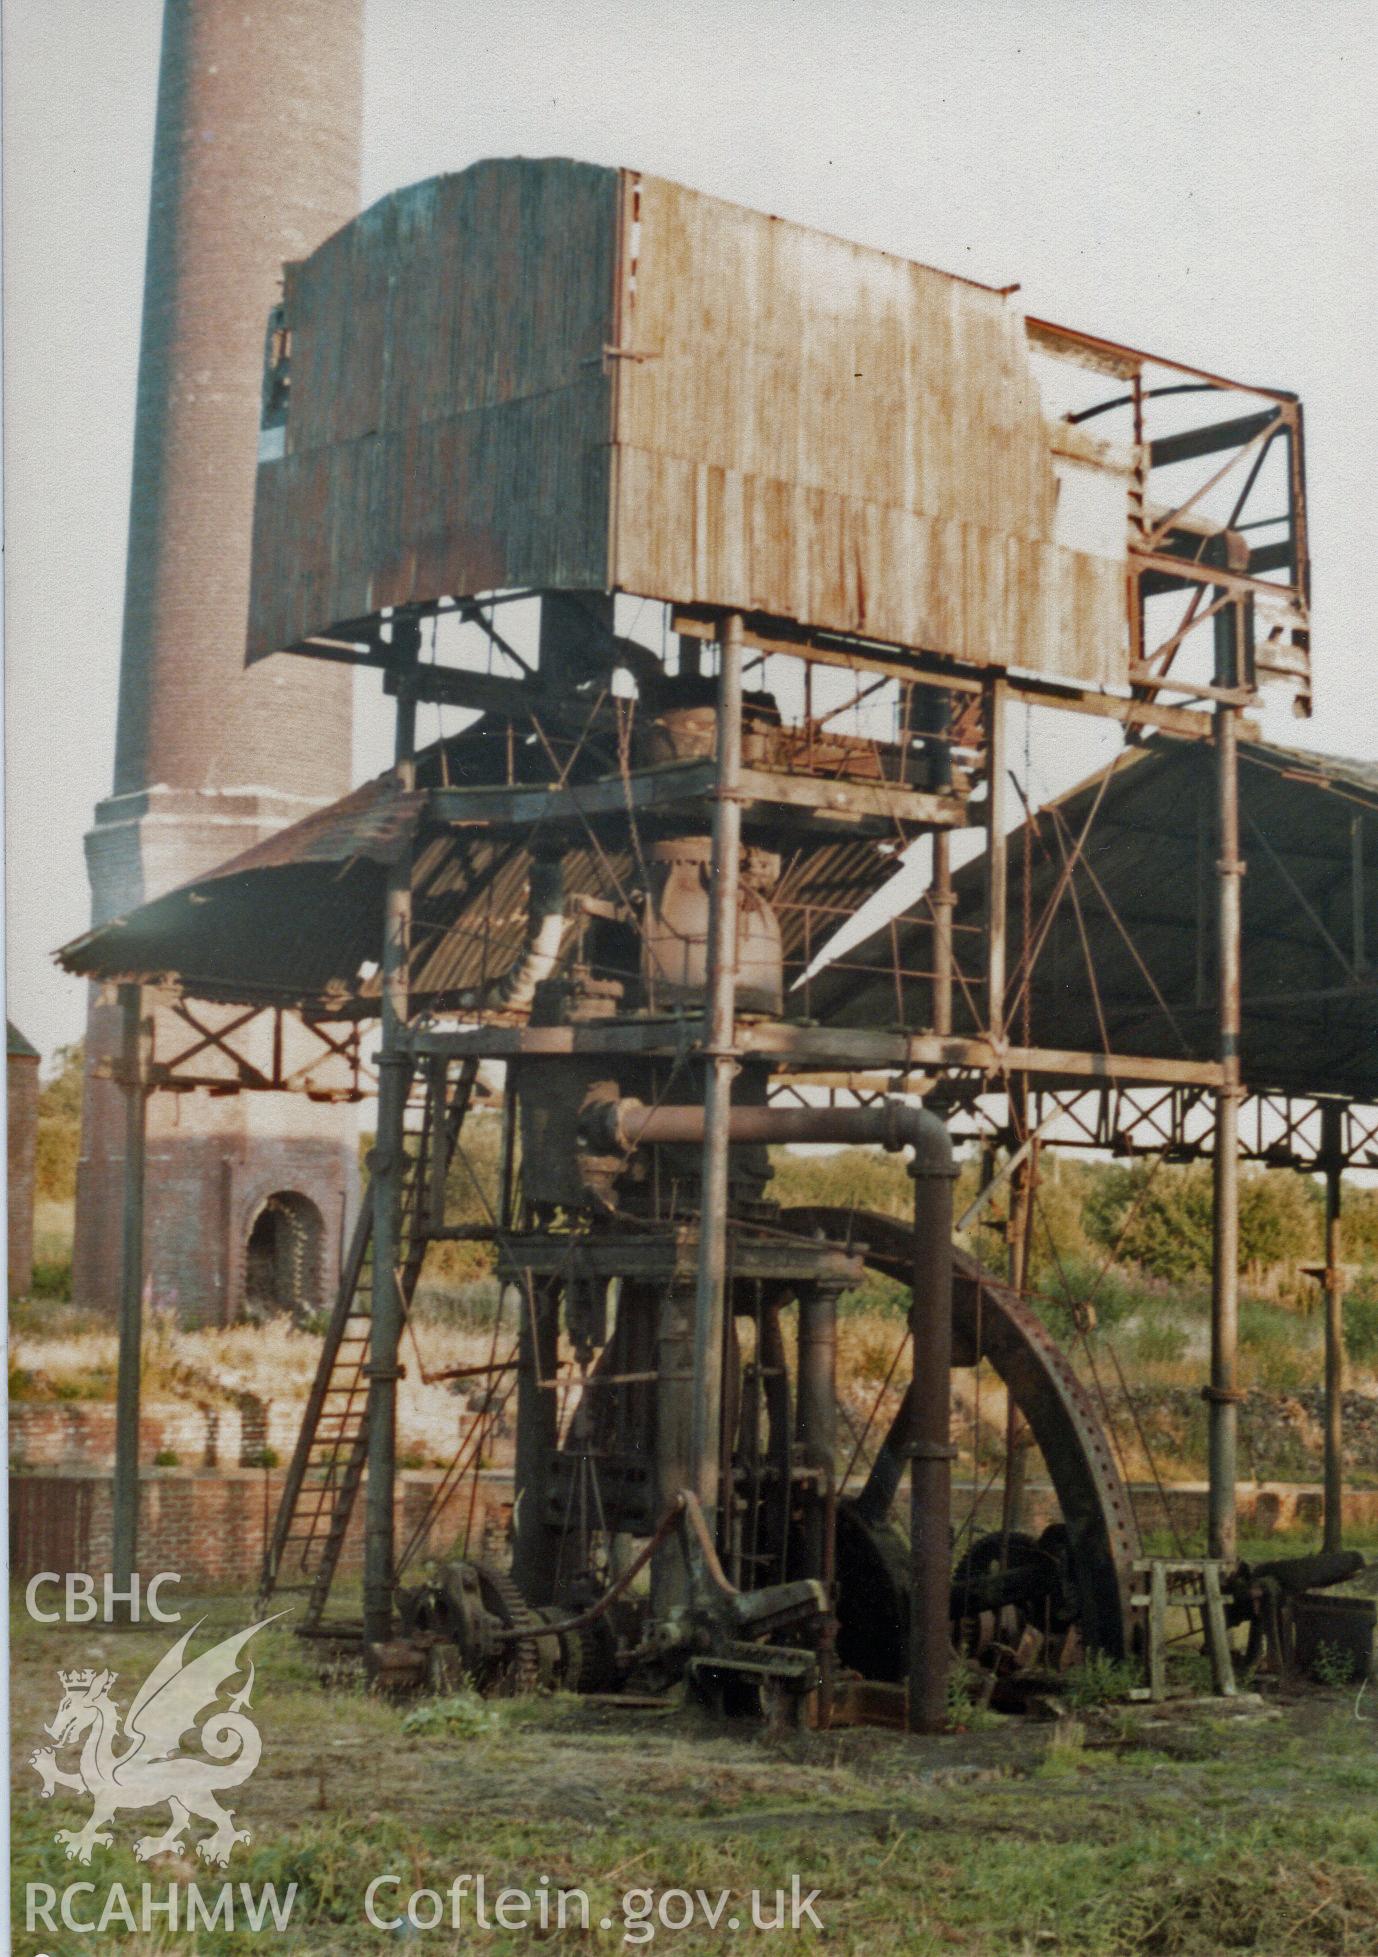 View of Kidwelly Tinplate Works in 1981